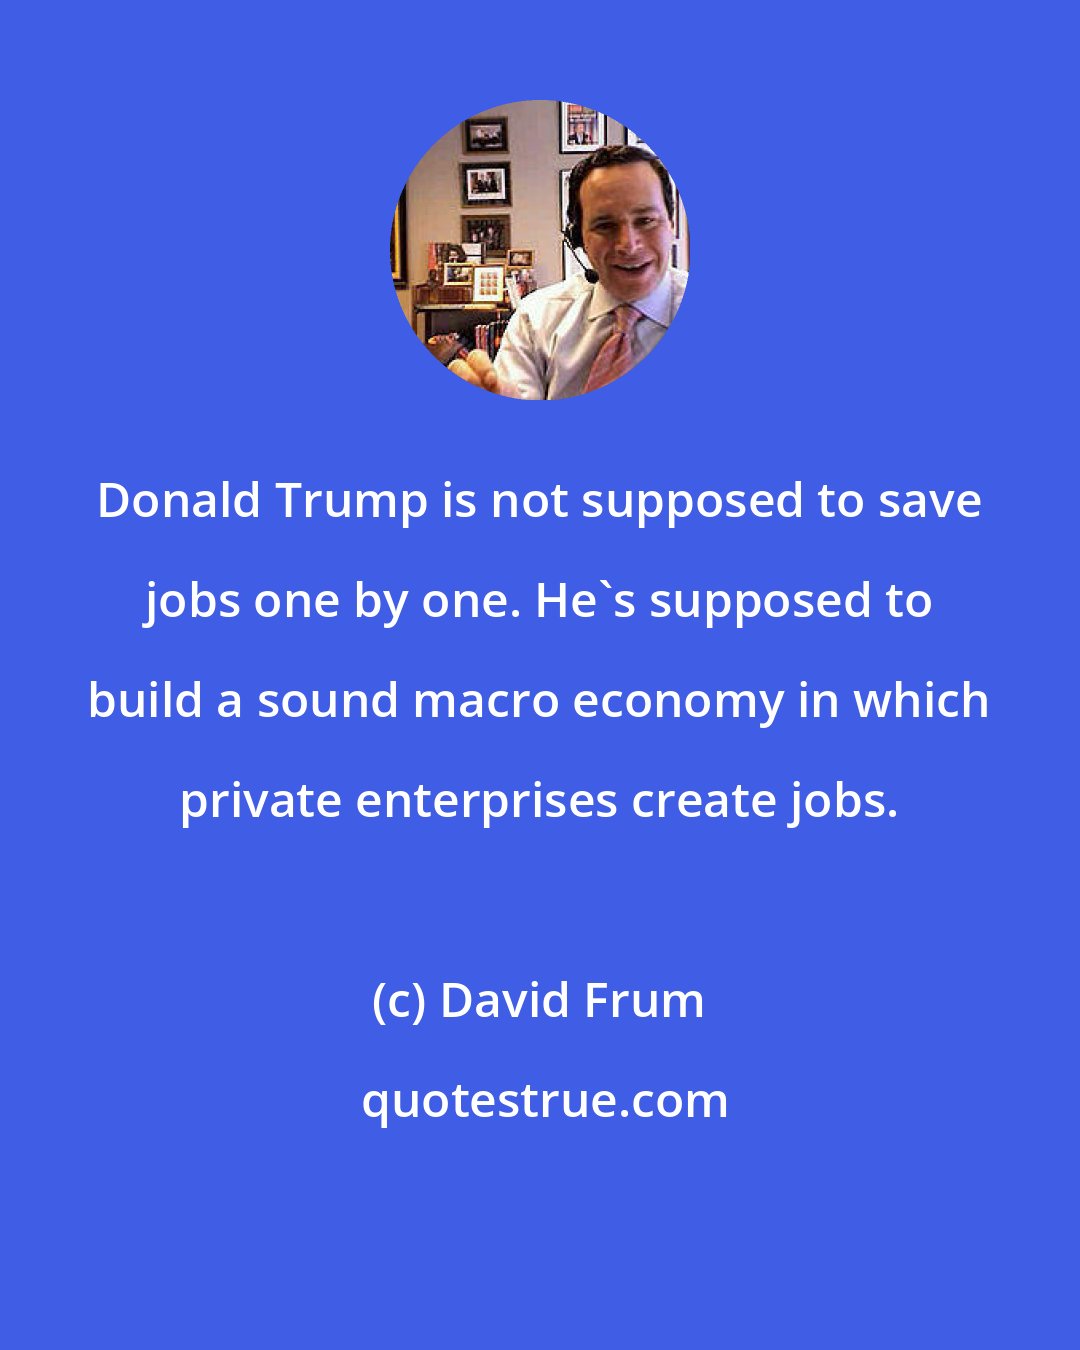 David Frum: Donald Trump is not supposed to save jobs one by one. He's supposed to build a sound macro economy in which private enterprises create jobs.